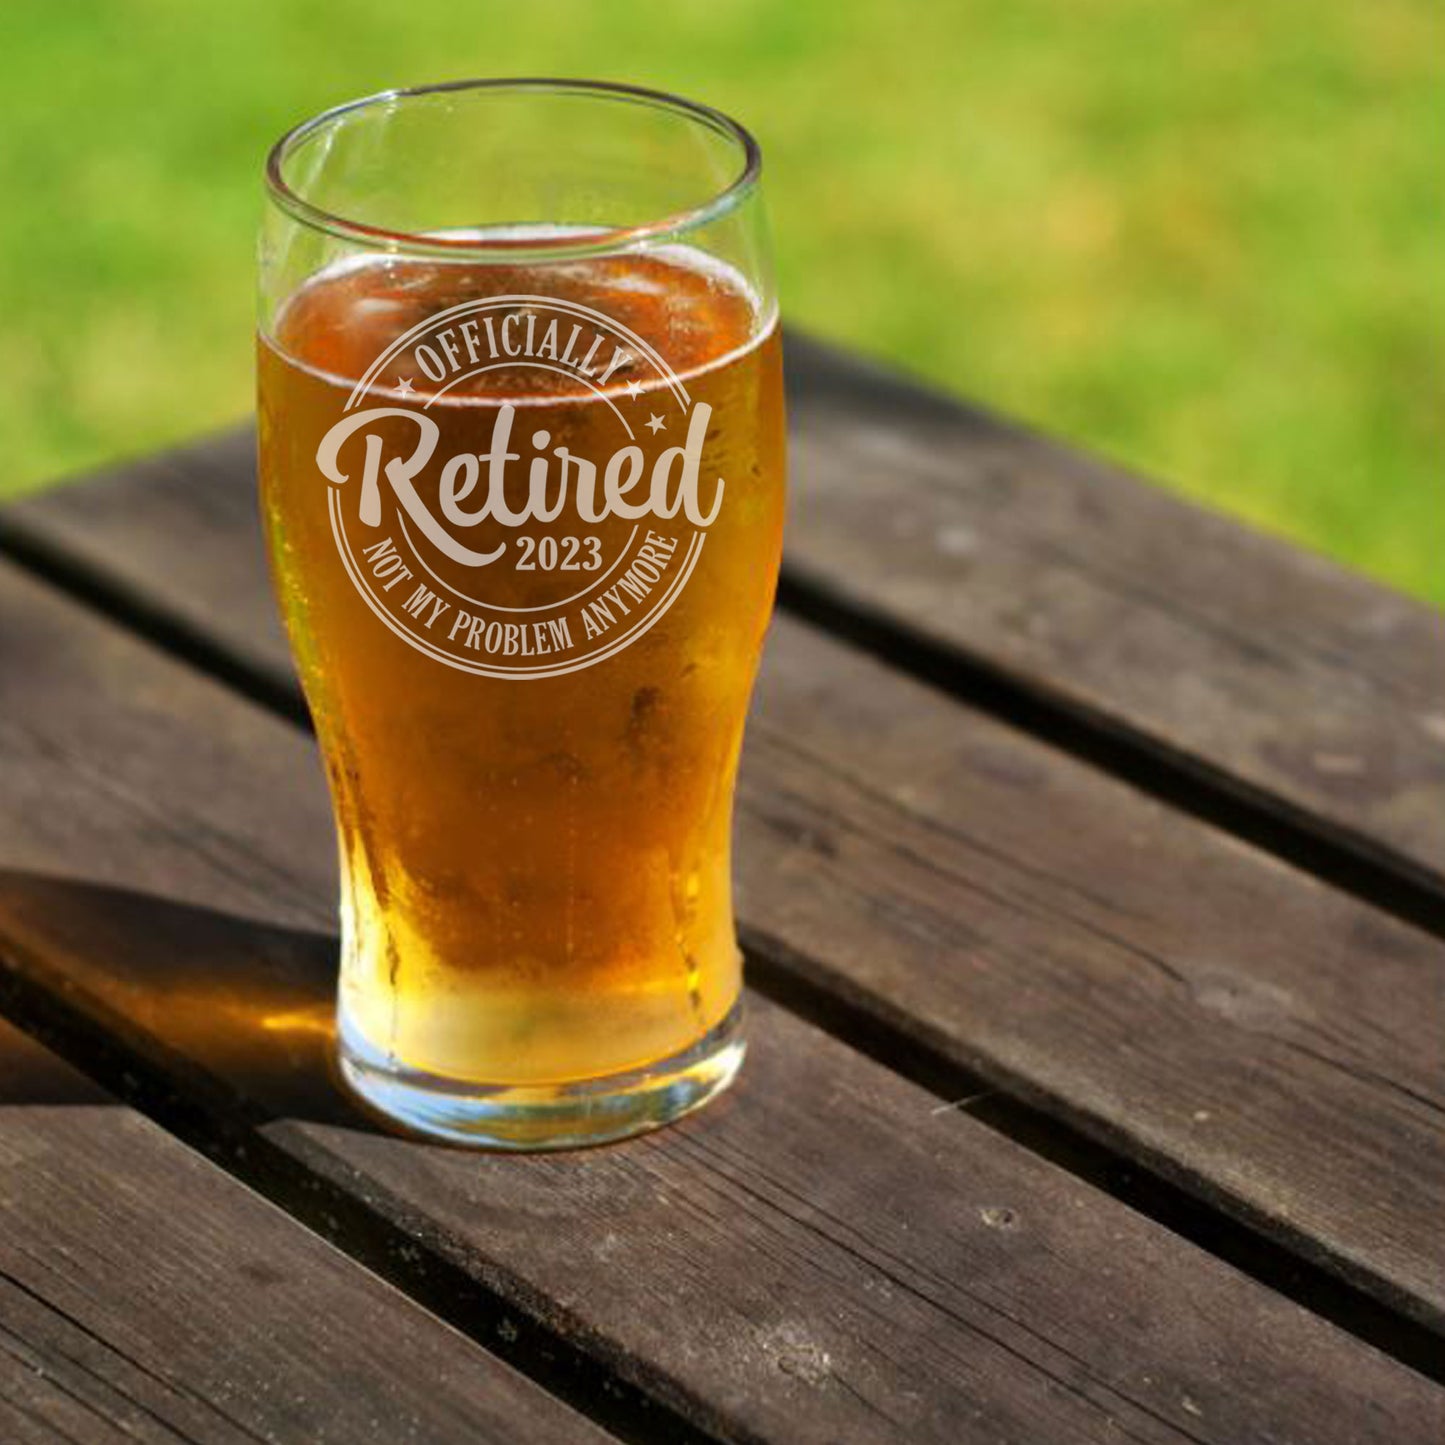 Officially Retired Engraved Beer Glass and/or Coaster Set  - Always Looking Good -   